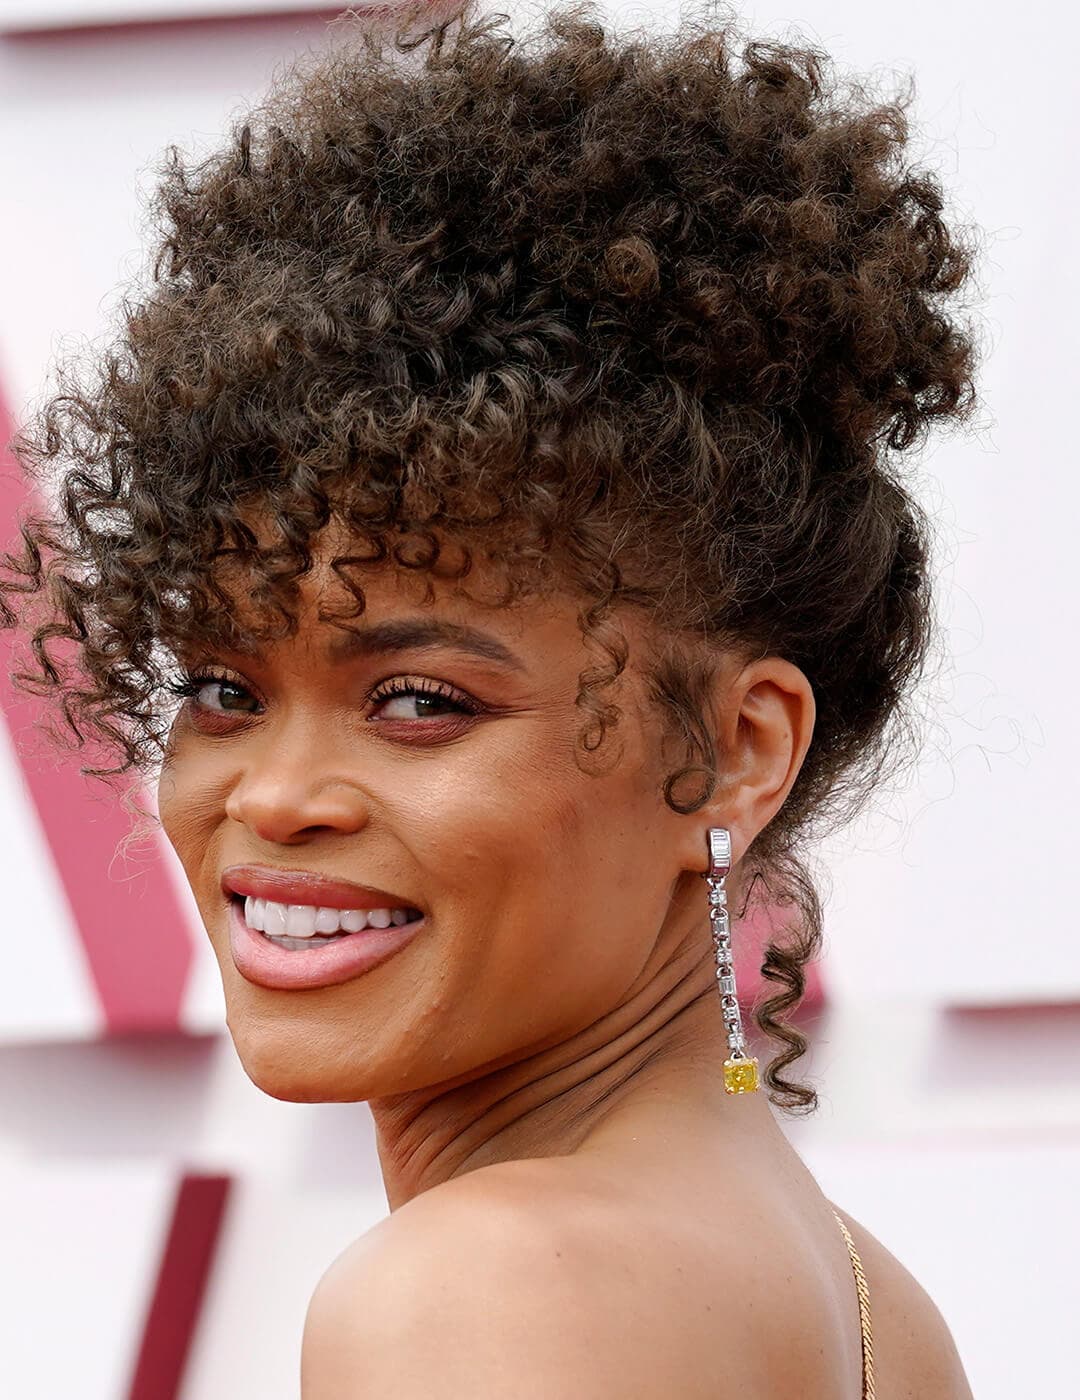 An image of Andra Day wearing a long yellow-end silver earring with a french-twist hairstyle